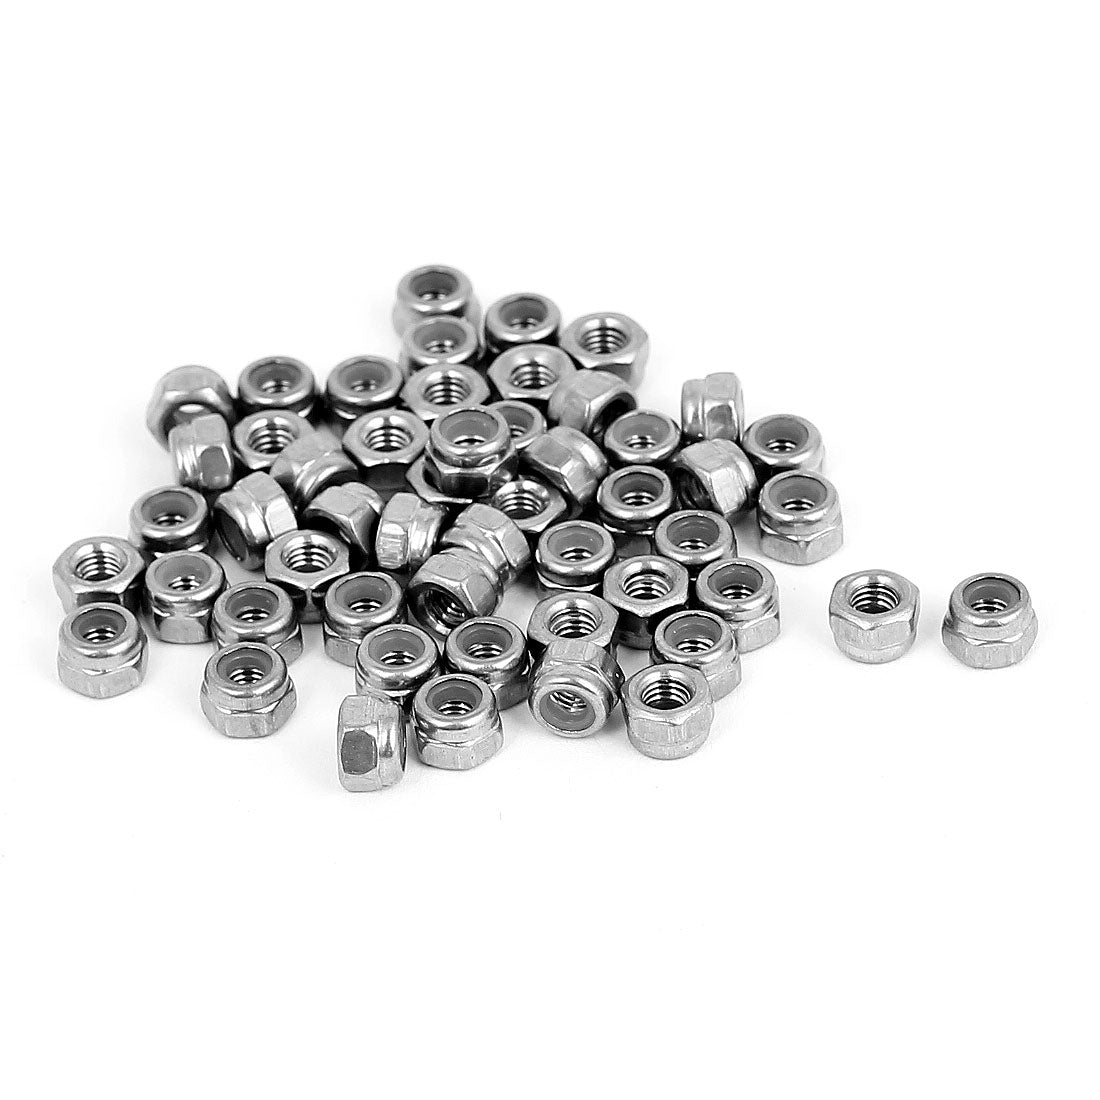 uxcell Uxcell M5 x 0.8mm Stainless Steel  Self-Locking Nylon Insert Hex Lock Nuts 50pcs